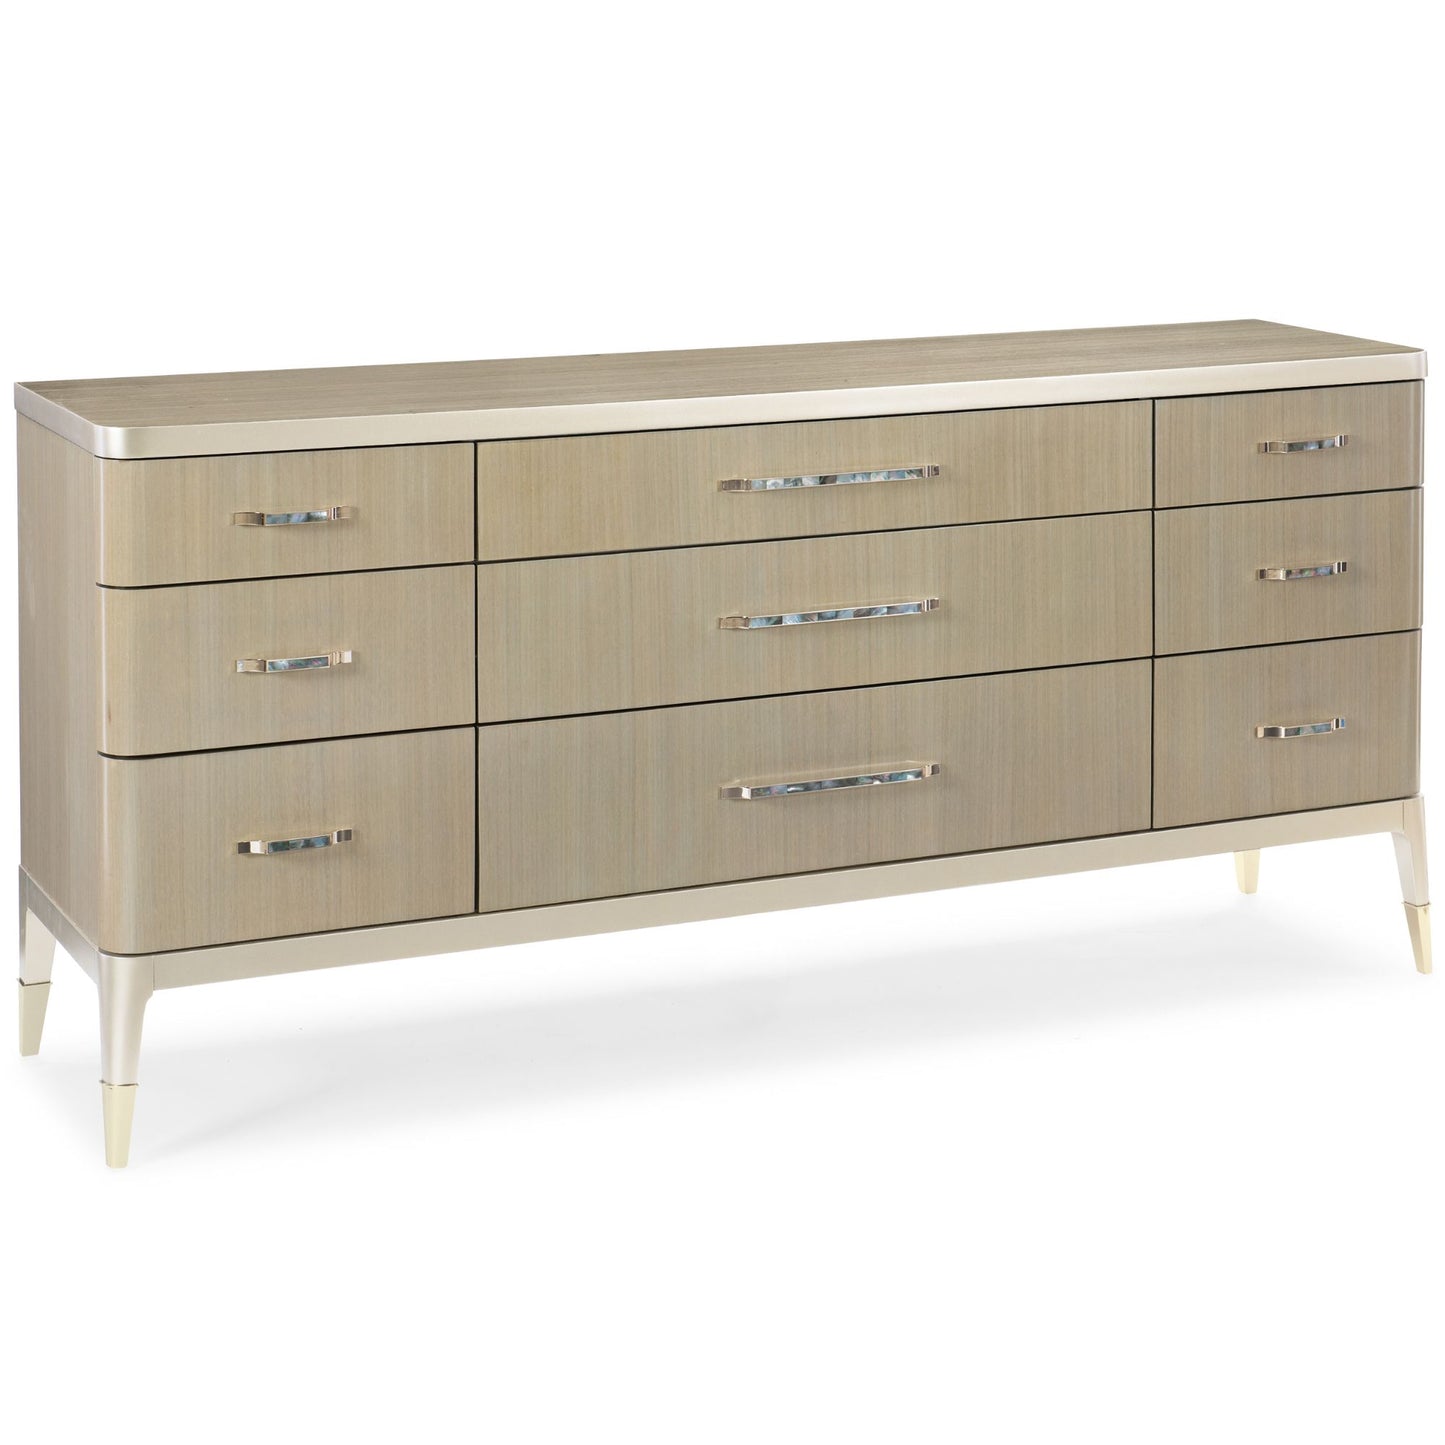 Caracole Classic All Dressed Up Bedroom Dresser